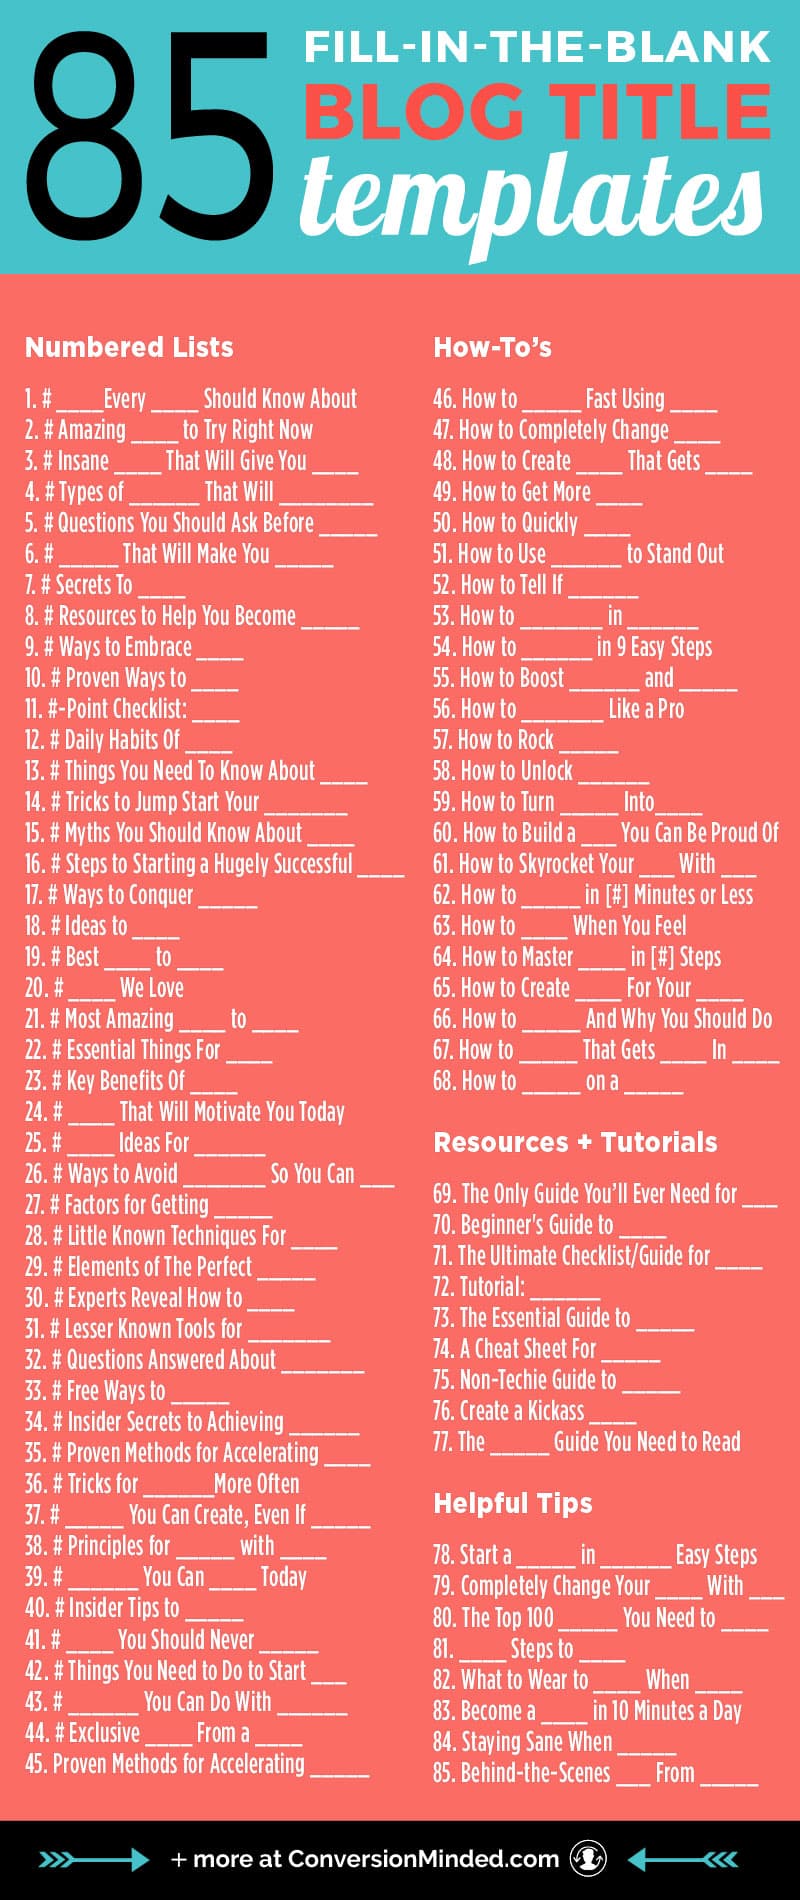 84+ catchy blog titles! All you have to do is choose your favorite blog post title template, fill in the blanks and get ready for more blog traffic. Check out ConversionMinded for even more, plus a downloadable swipe file you can use!